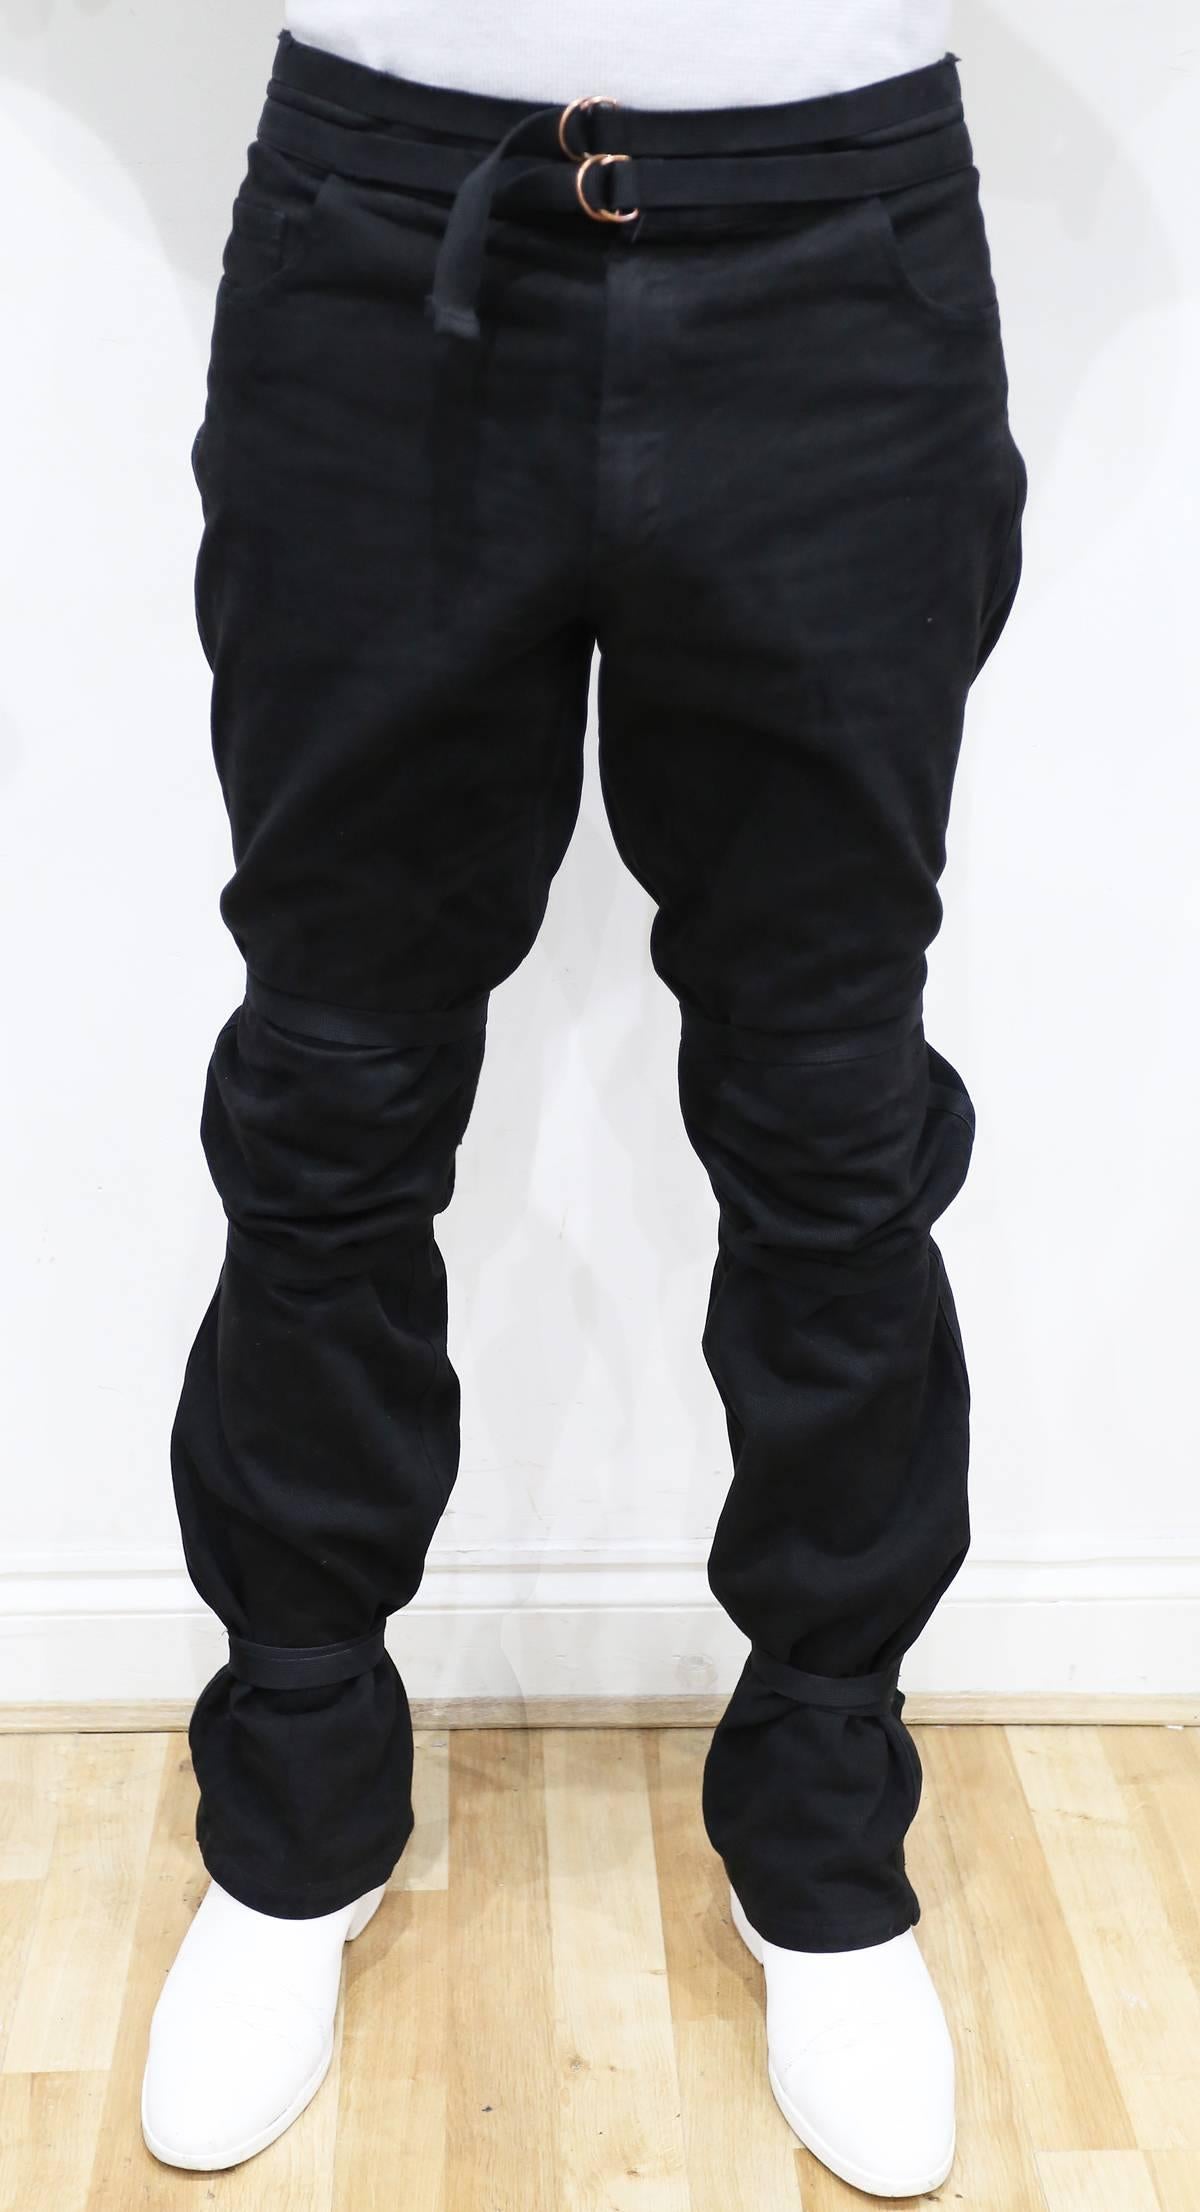 Ultra rare and highly collectable Raf Simons bondage jean pants from the Spring-Summer 2003 'CONSUMED' collection. The black jeans feature three bondage straps on each leg and can be style in various ways. 

Mens Size: 52